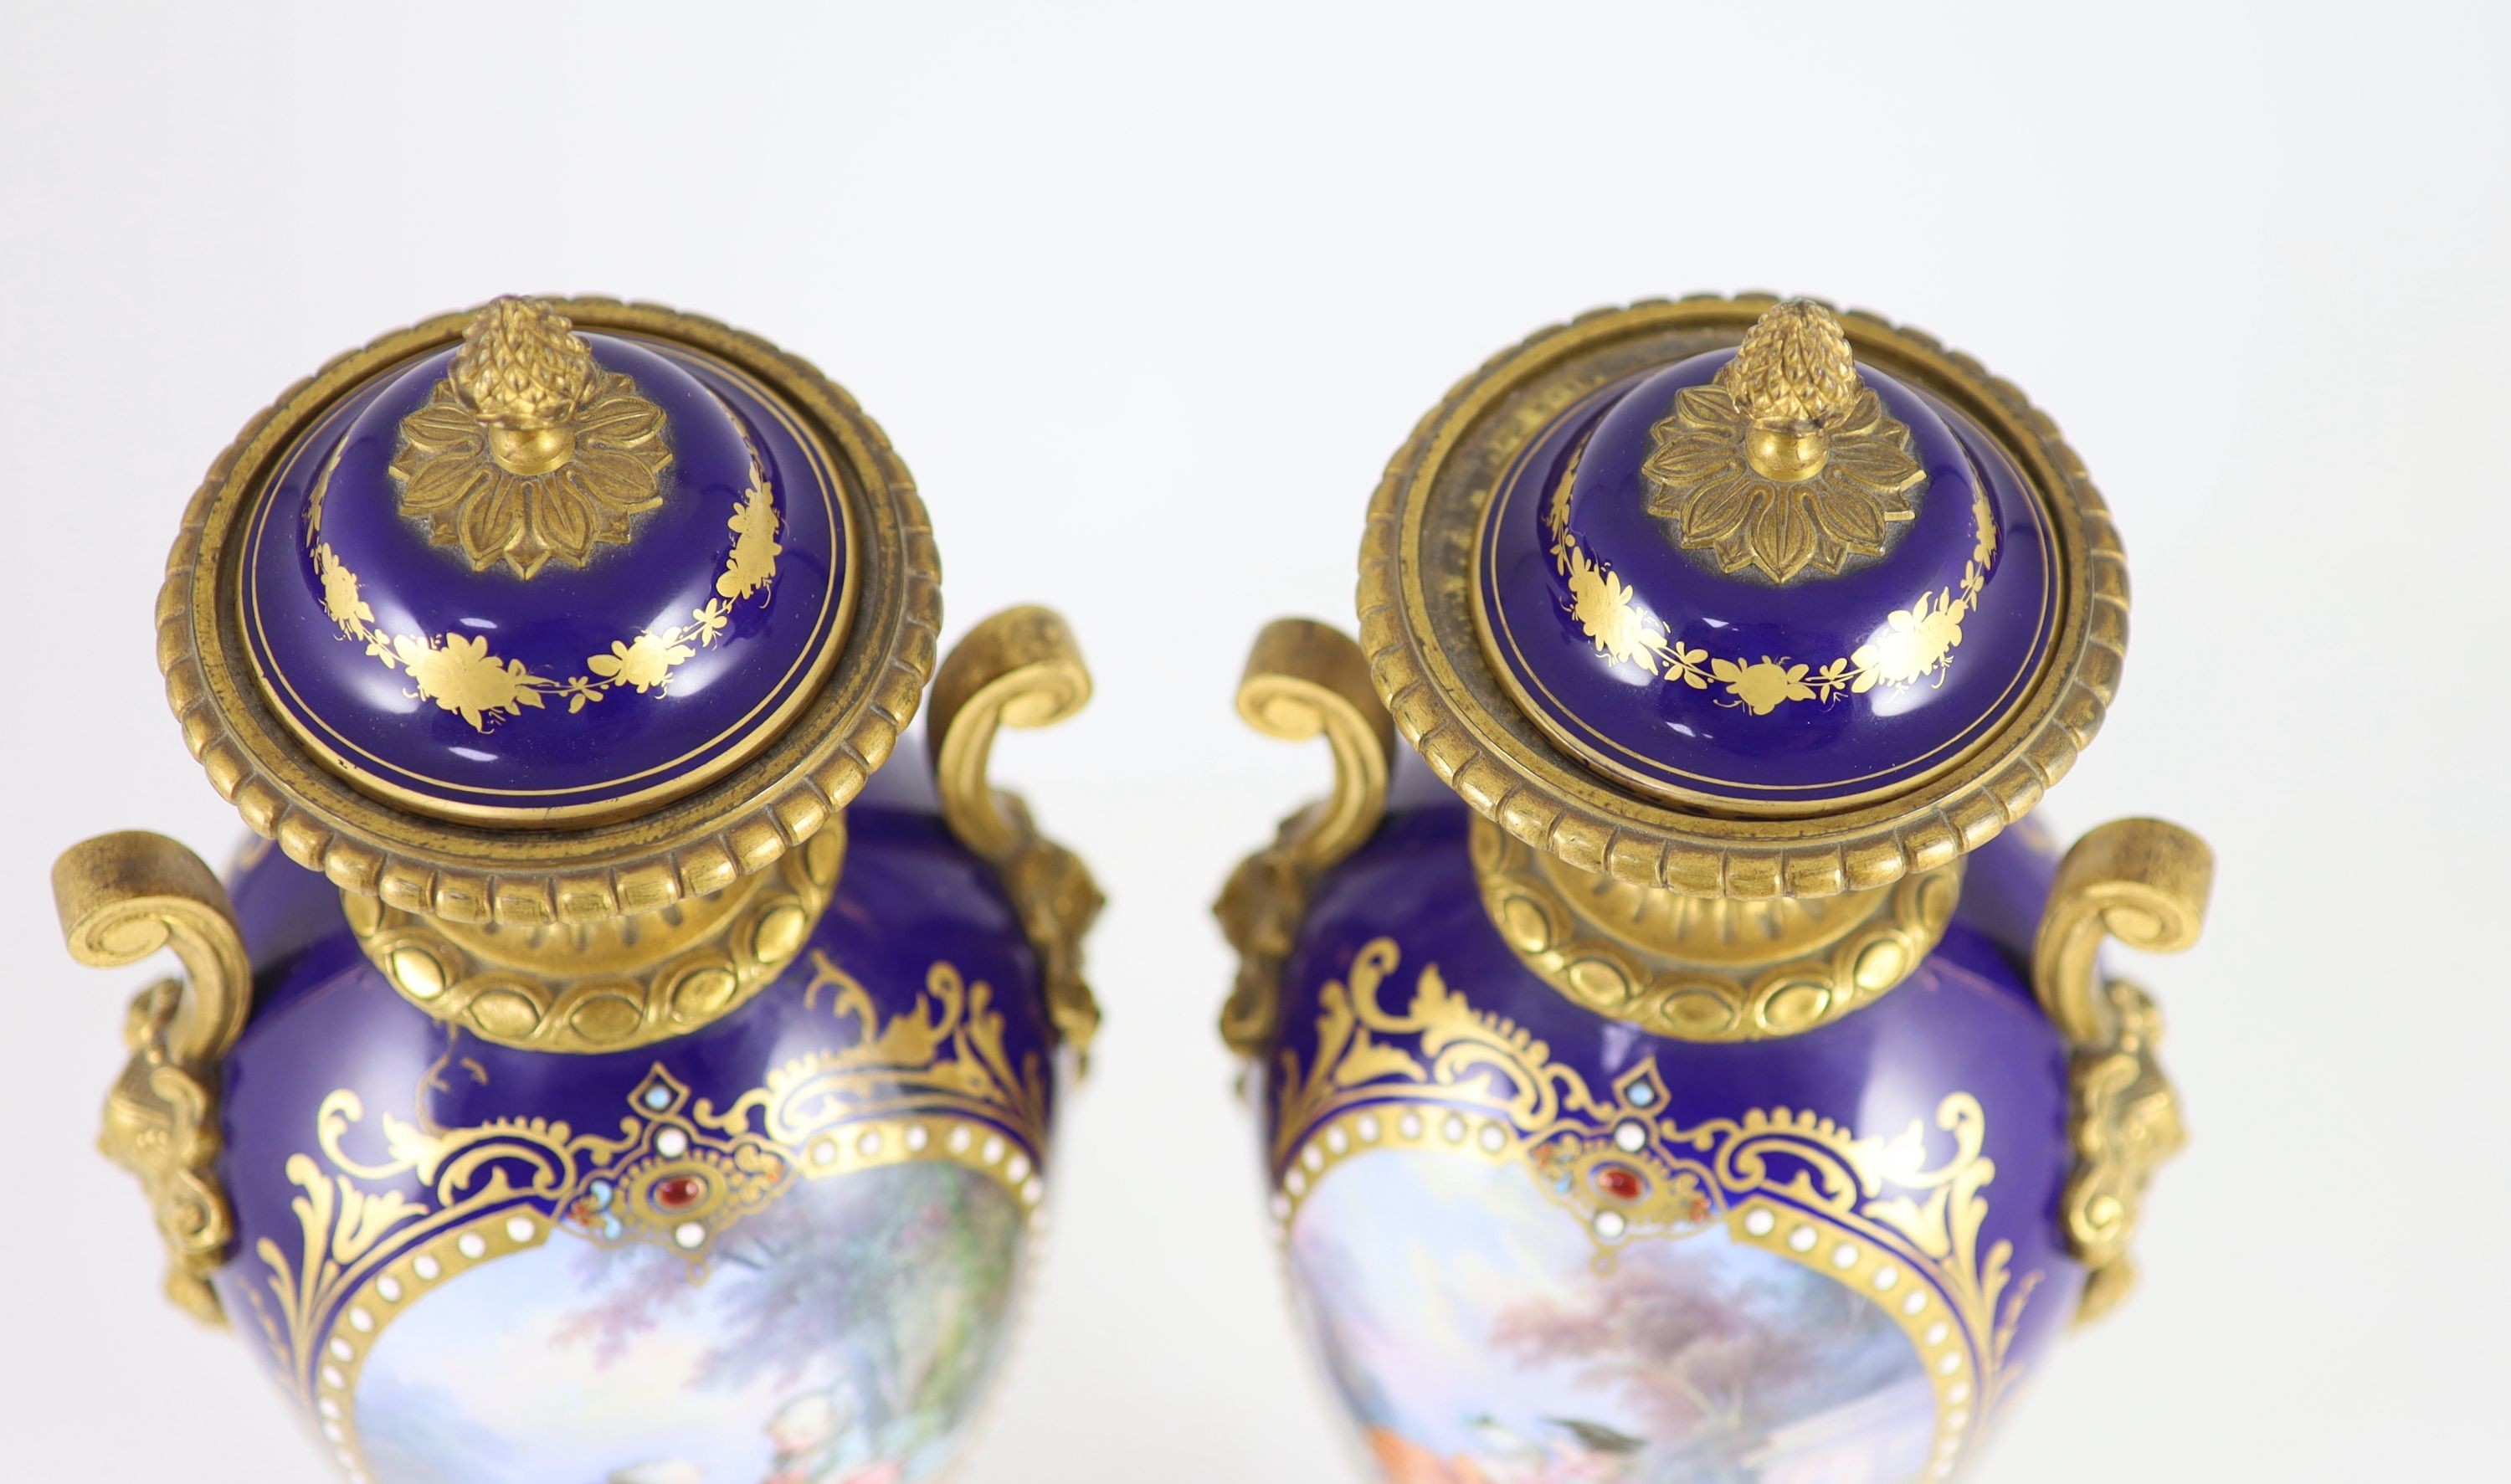 A pair of Sevres style ‘jewelled’ porcelain and ormolu mounted vases, c.1900, 41.5 cm high, one vase cracked